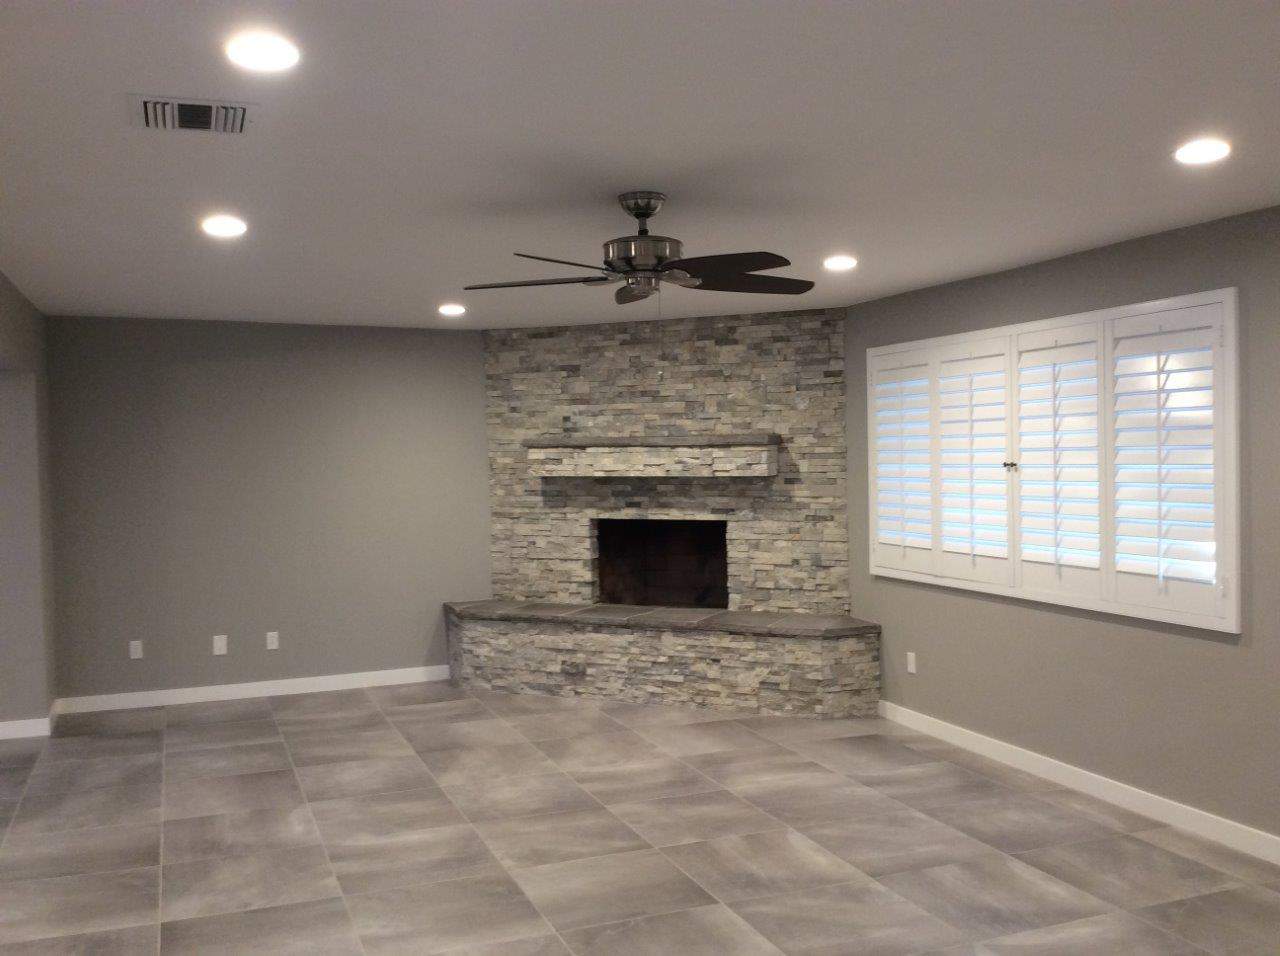 Newly painted room with fireplace